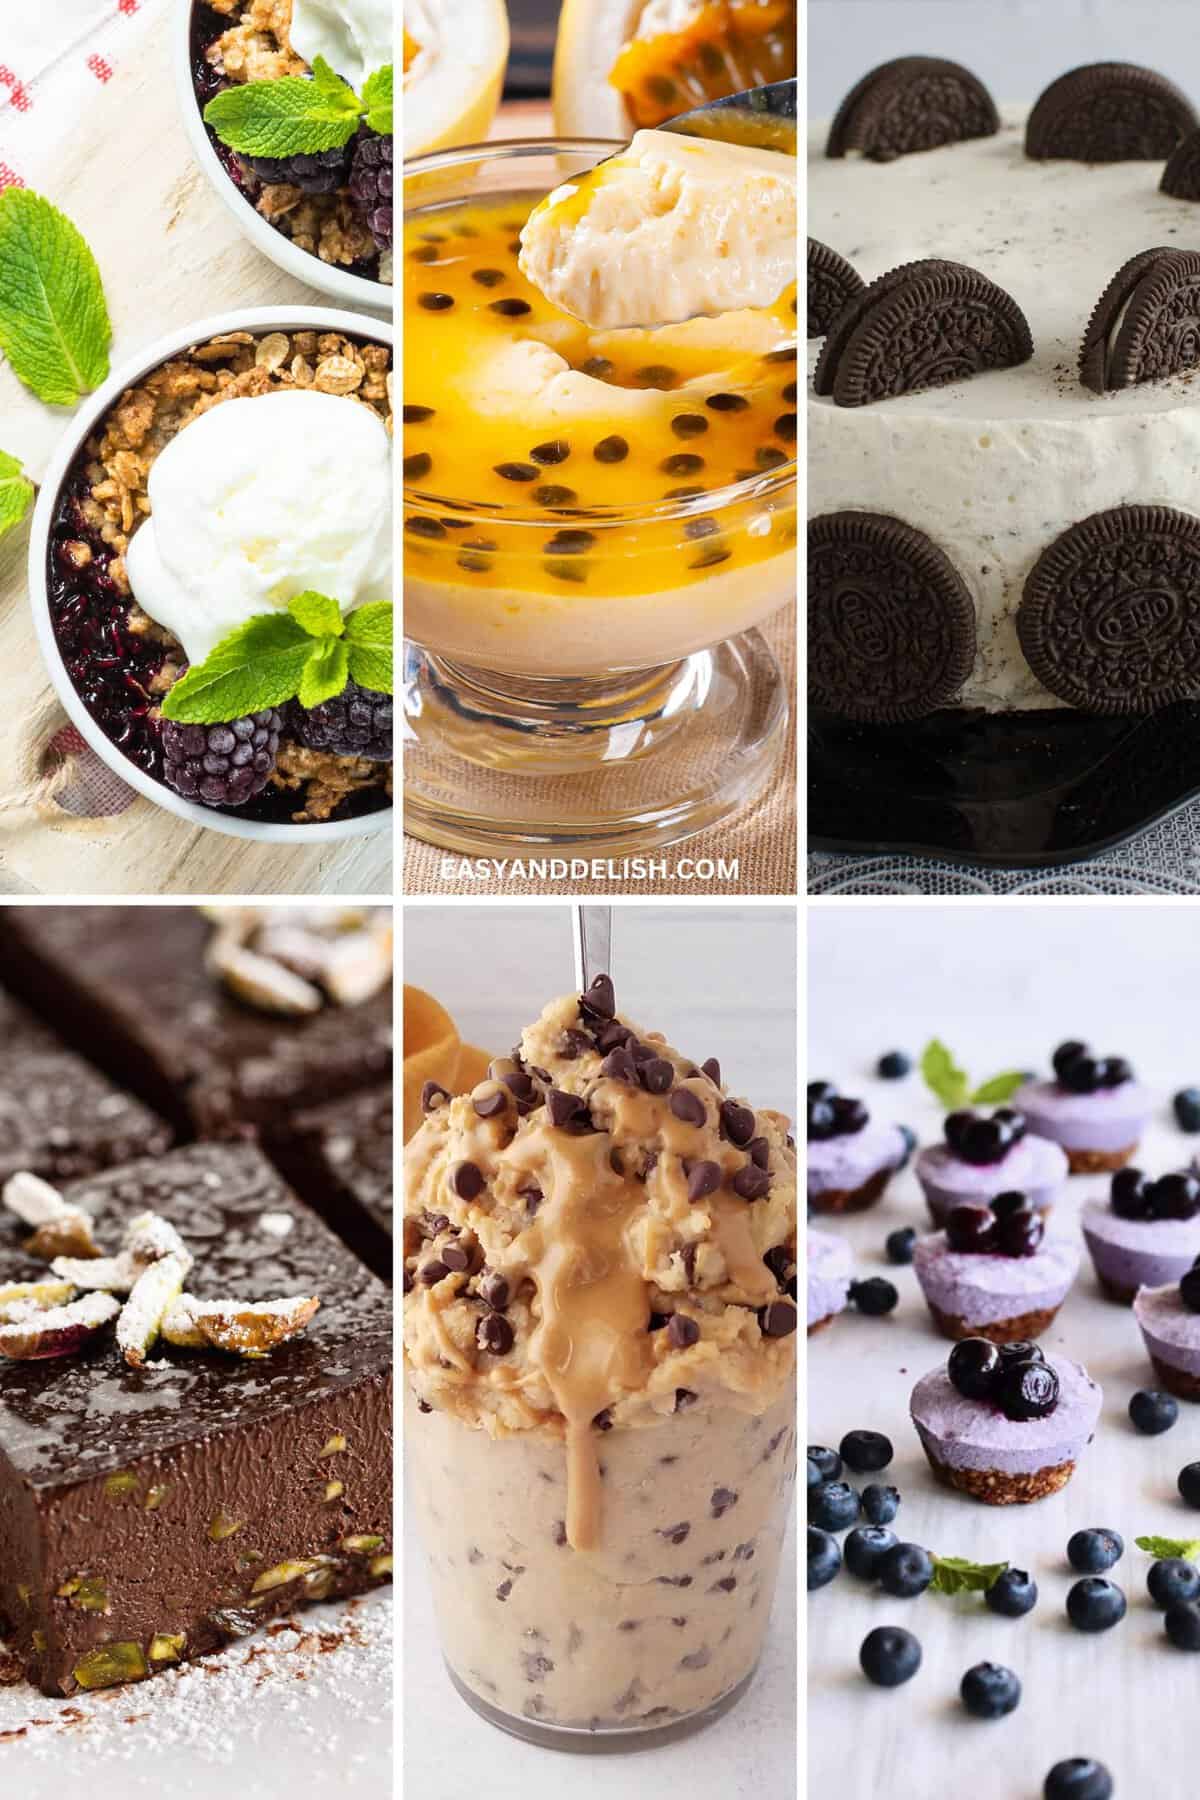 Image featuring 6 out of 22 chilled and frozen treats, including berry crumble, mousse, edible cookie dough, mini cheesecakes, no-bake brownies, and ice cream pie.